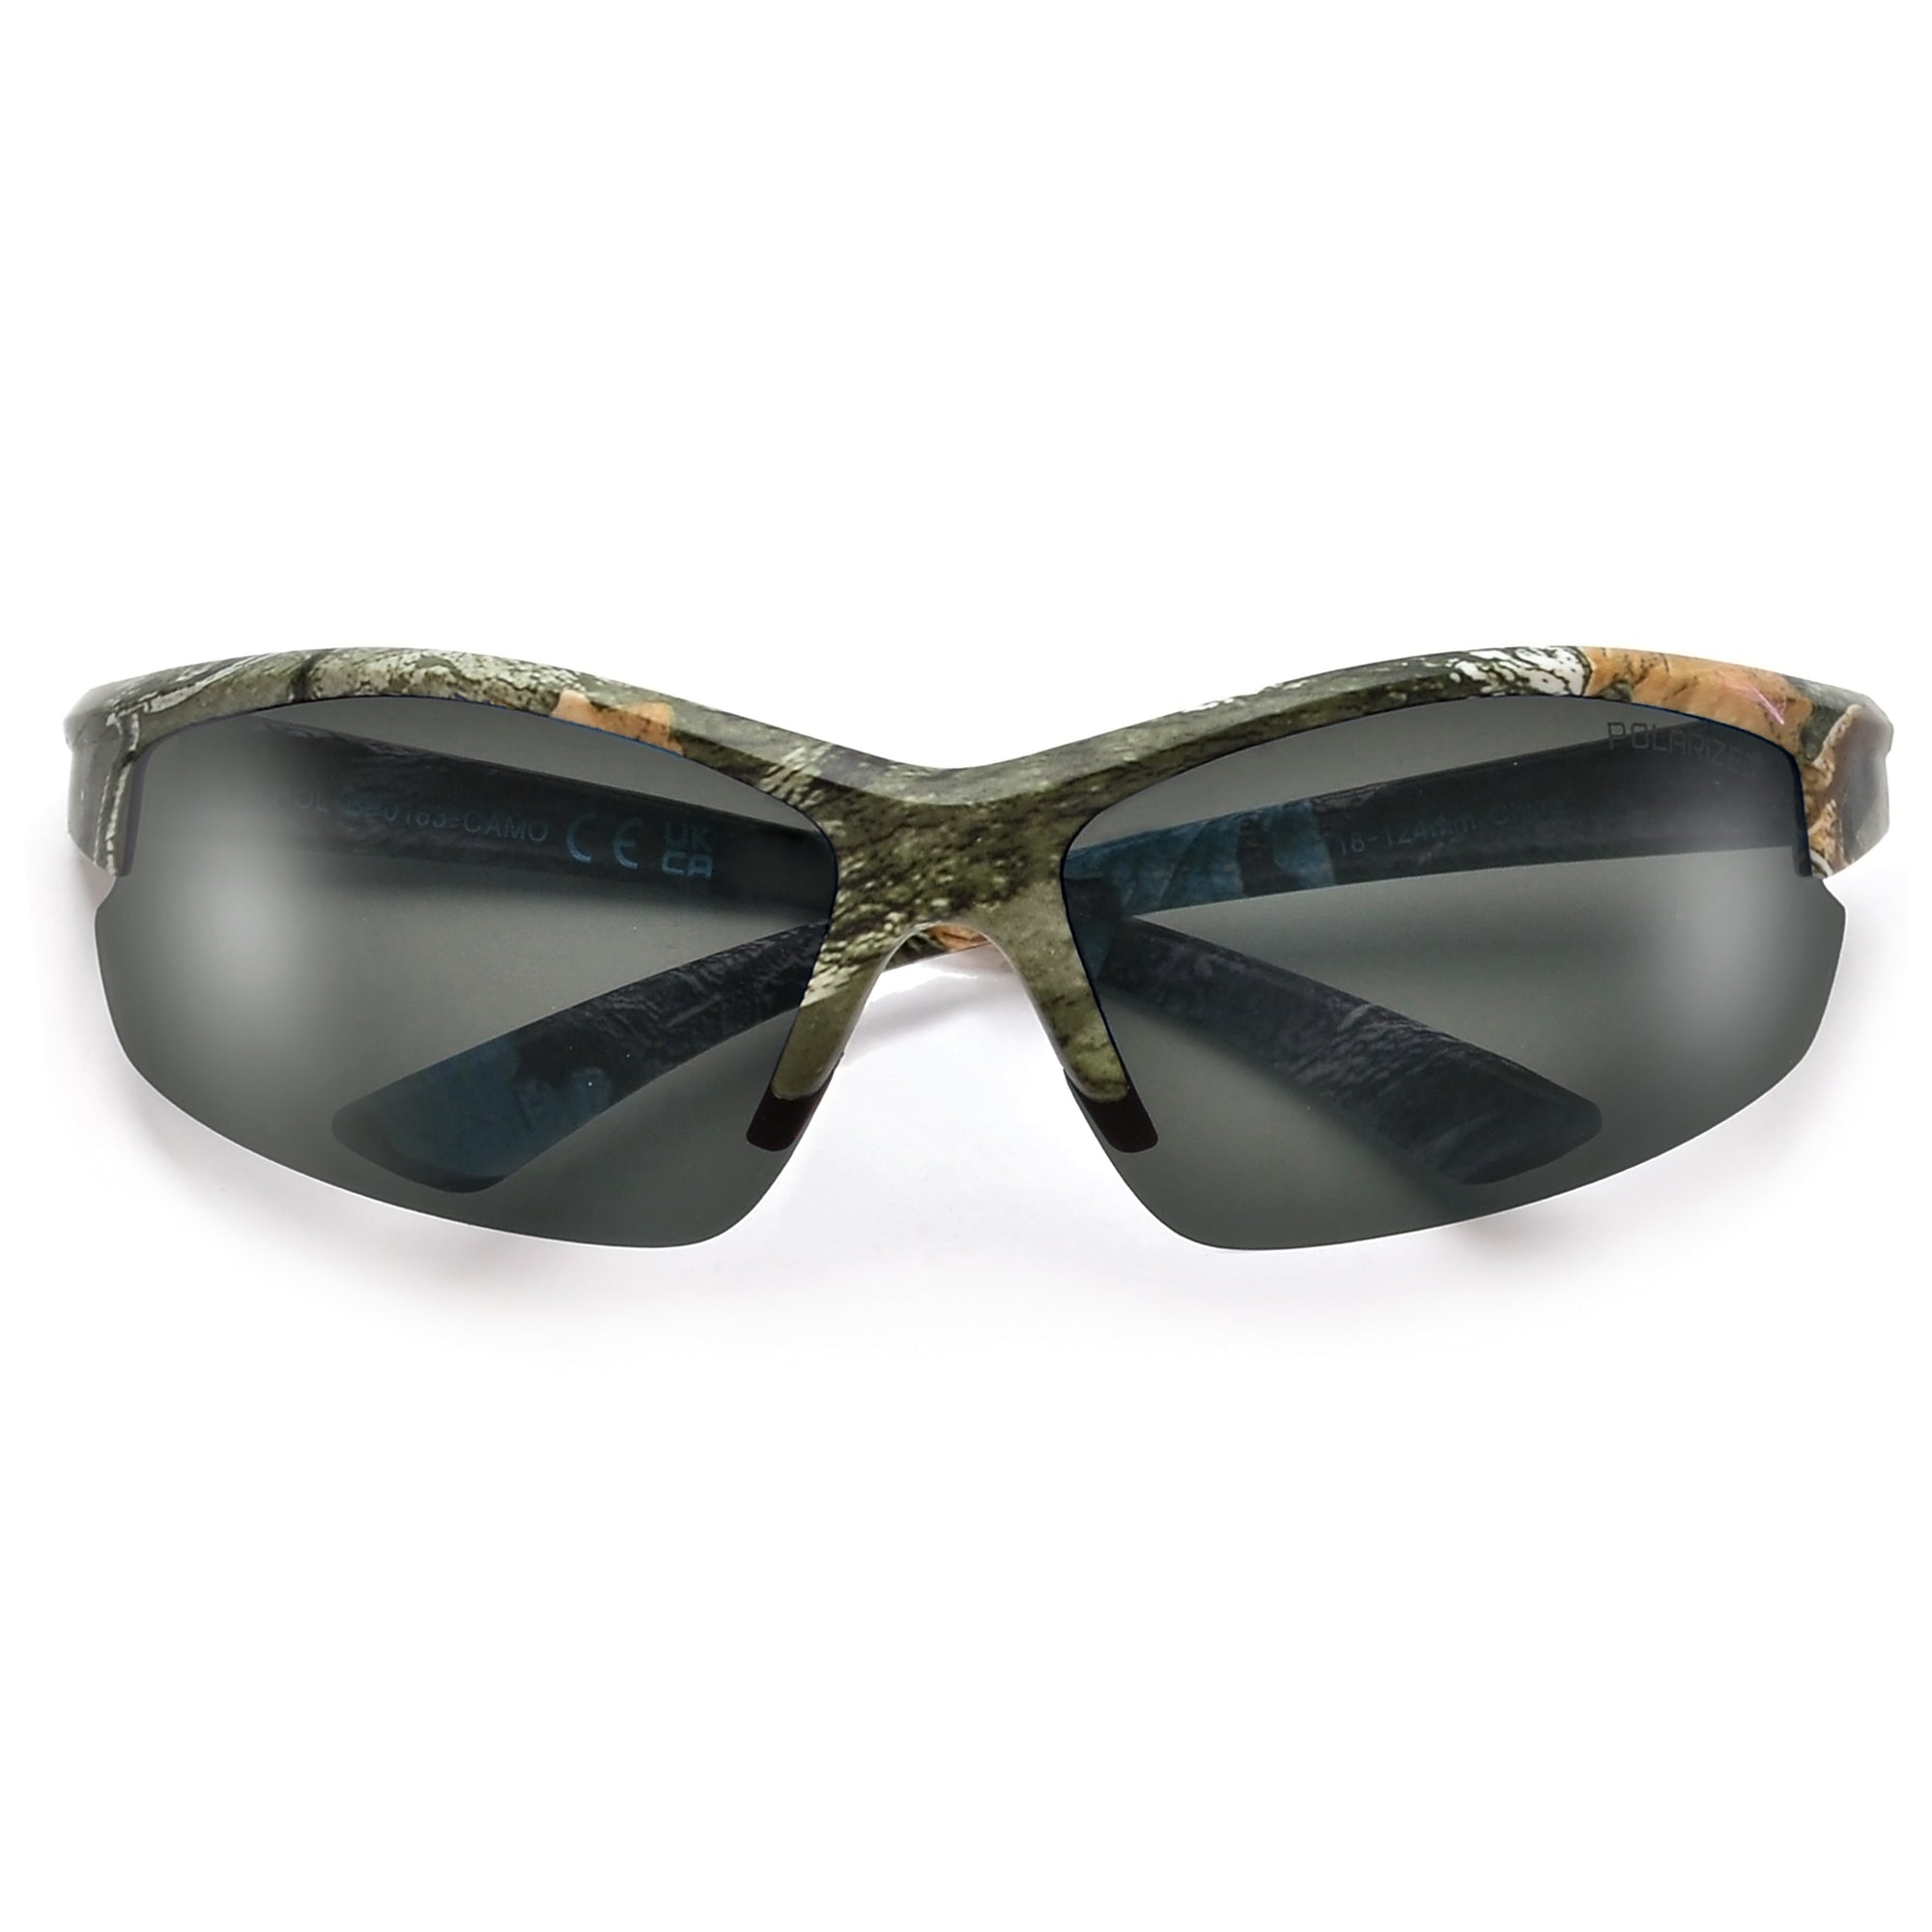 Polarized Camouflage Sunglasses for Fishing and Hunting - Colored Lens